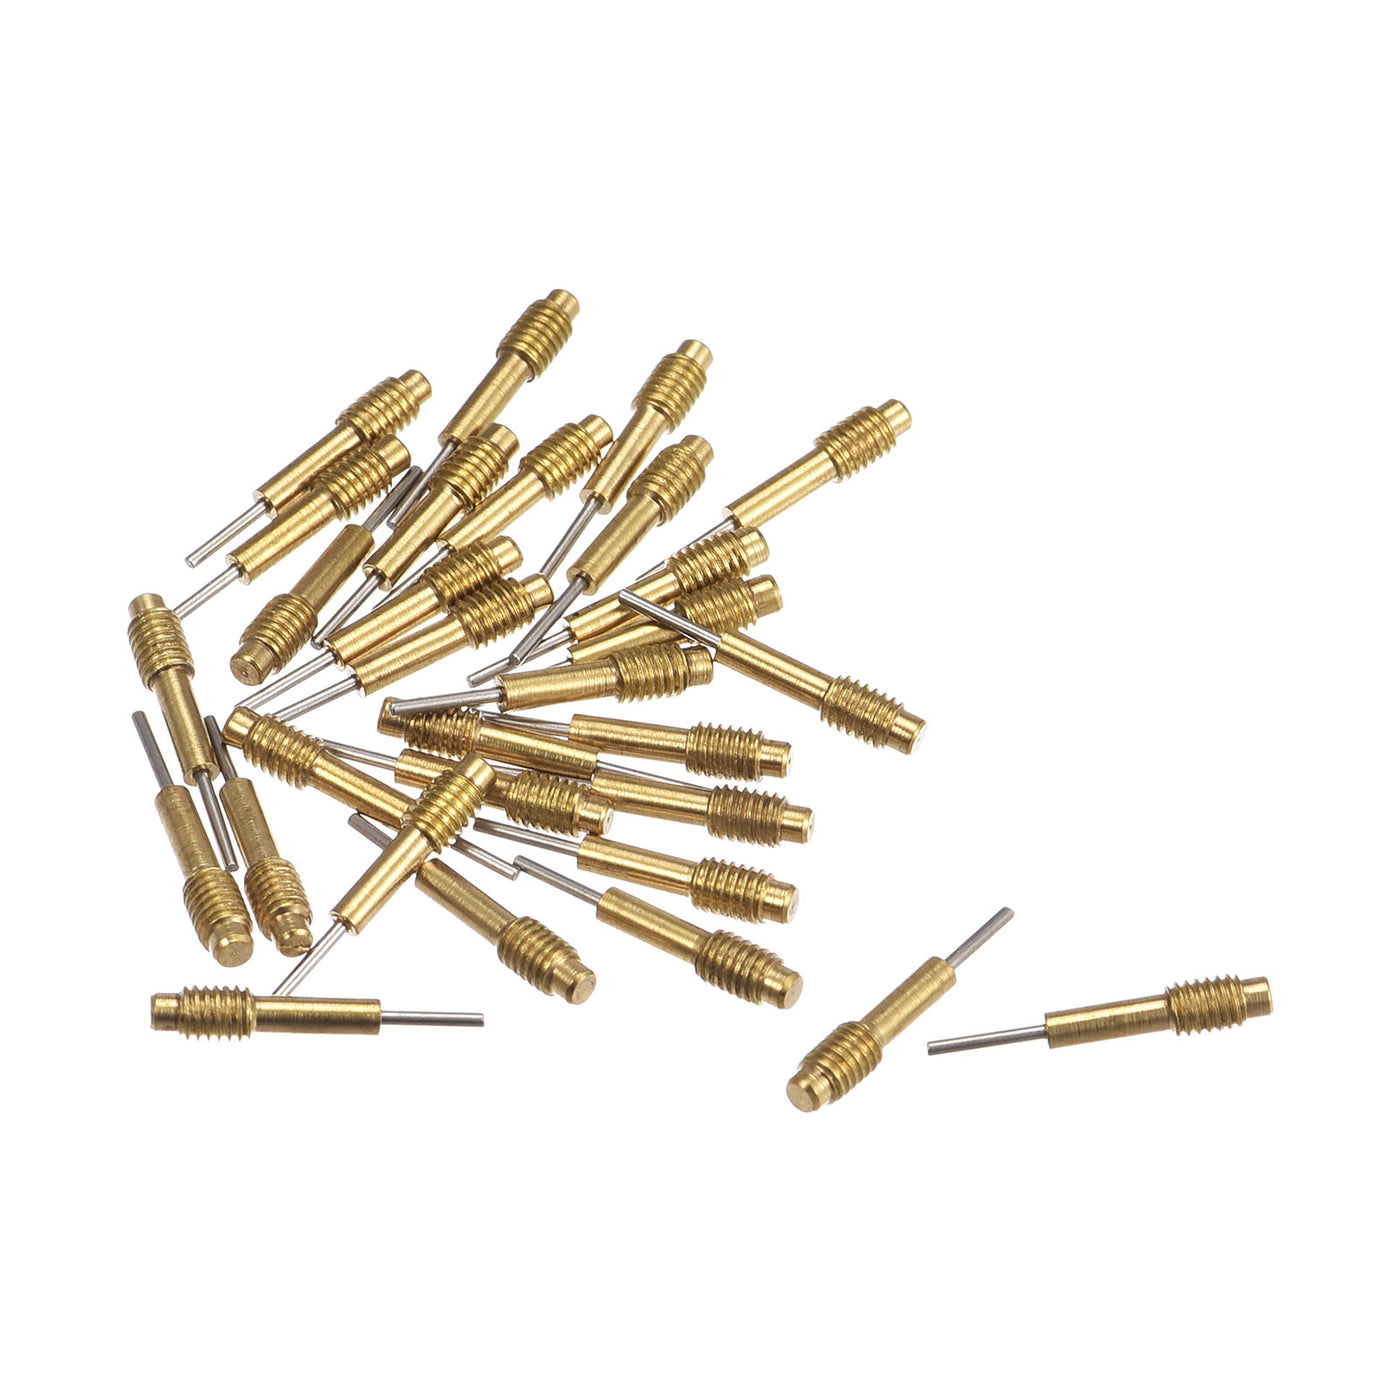 Uxcell Uxcell 30pcs Replace Pins for Watch Band Pin Punch Tool 0.8mm Dia Brass Link Pin Remover Punch Pins M3x0.5 Threads